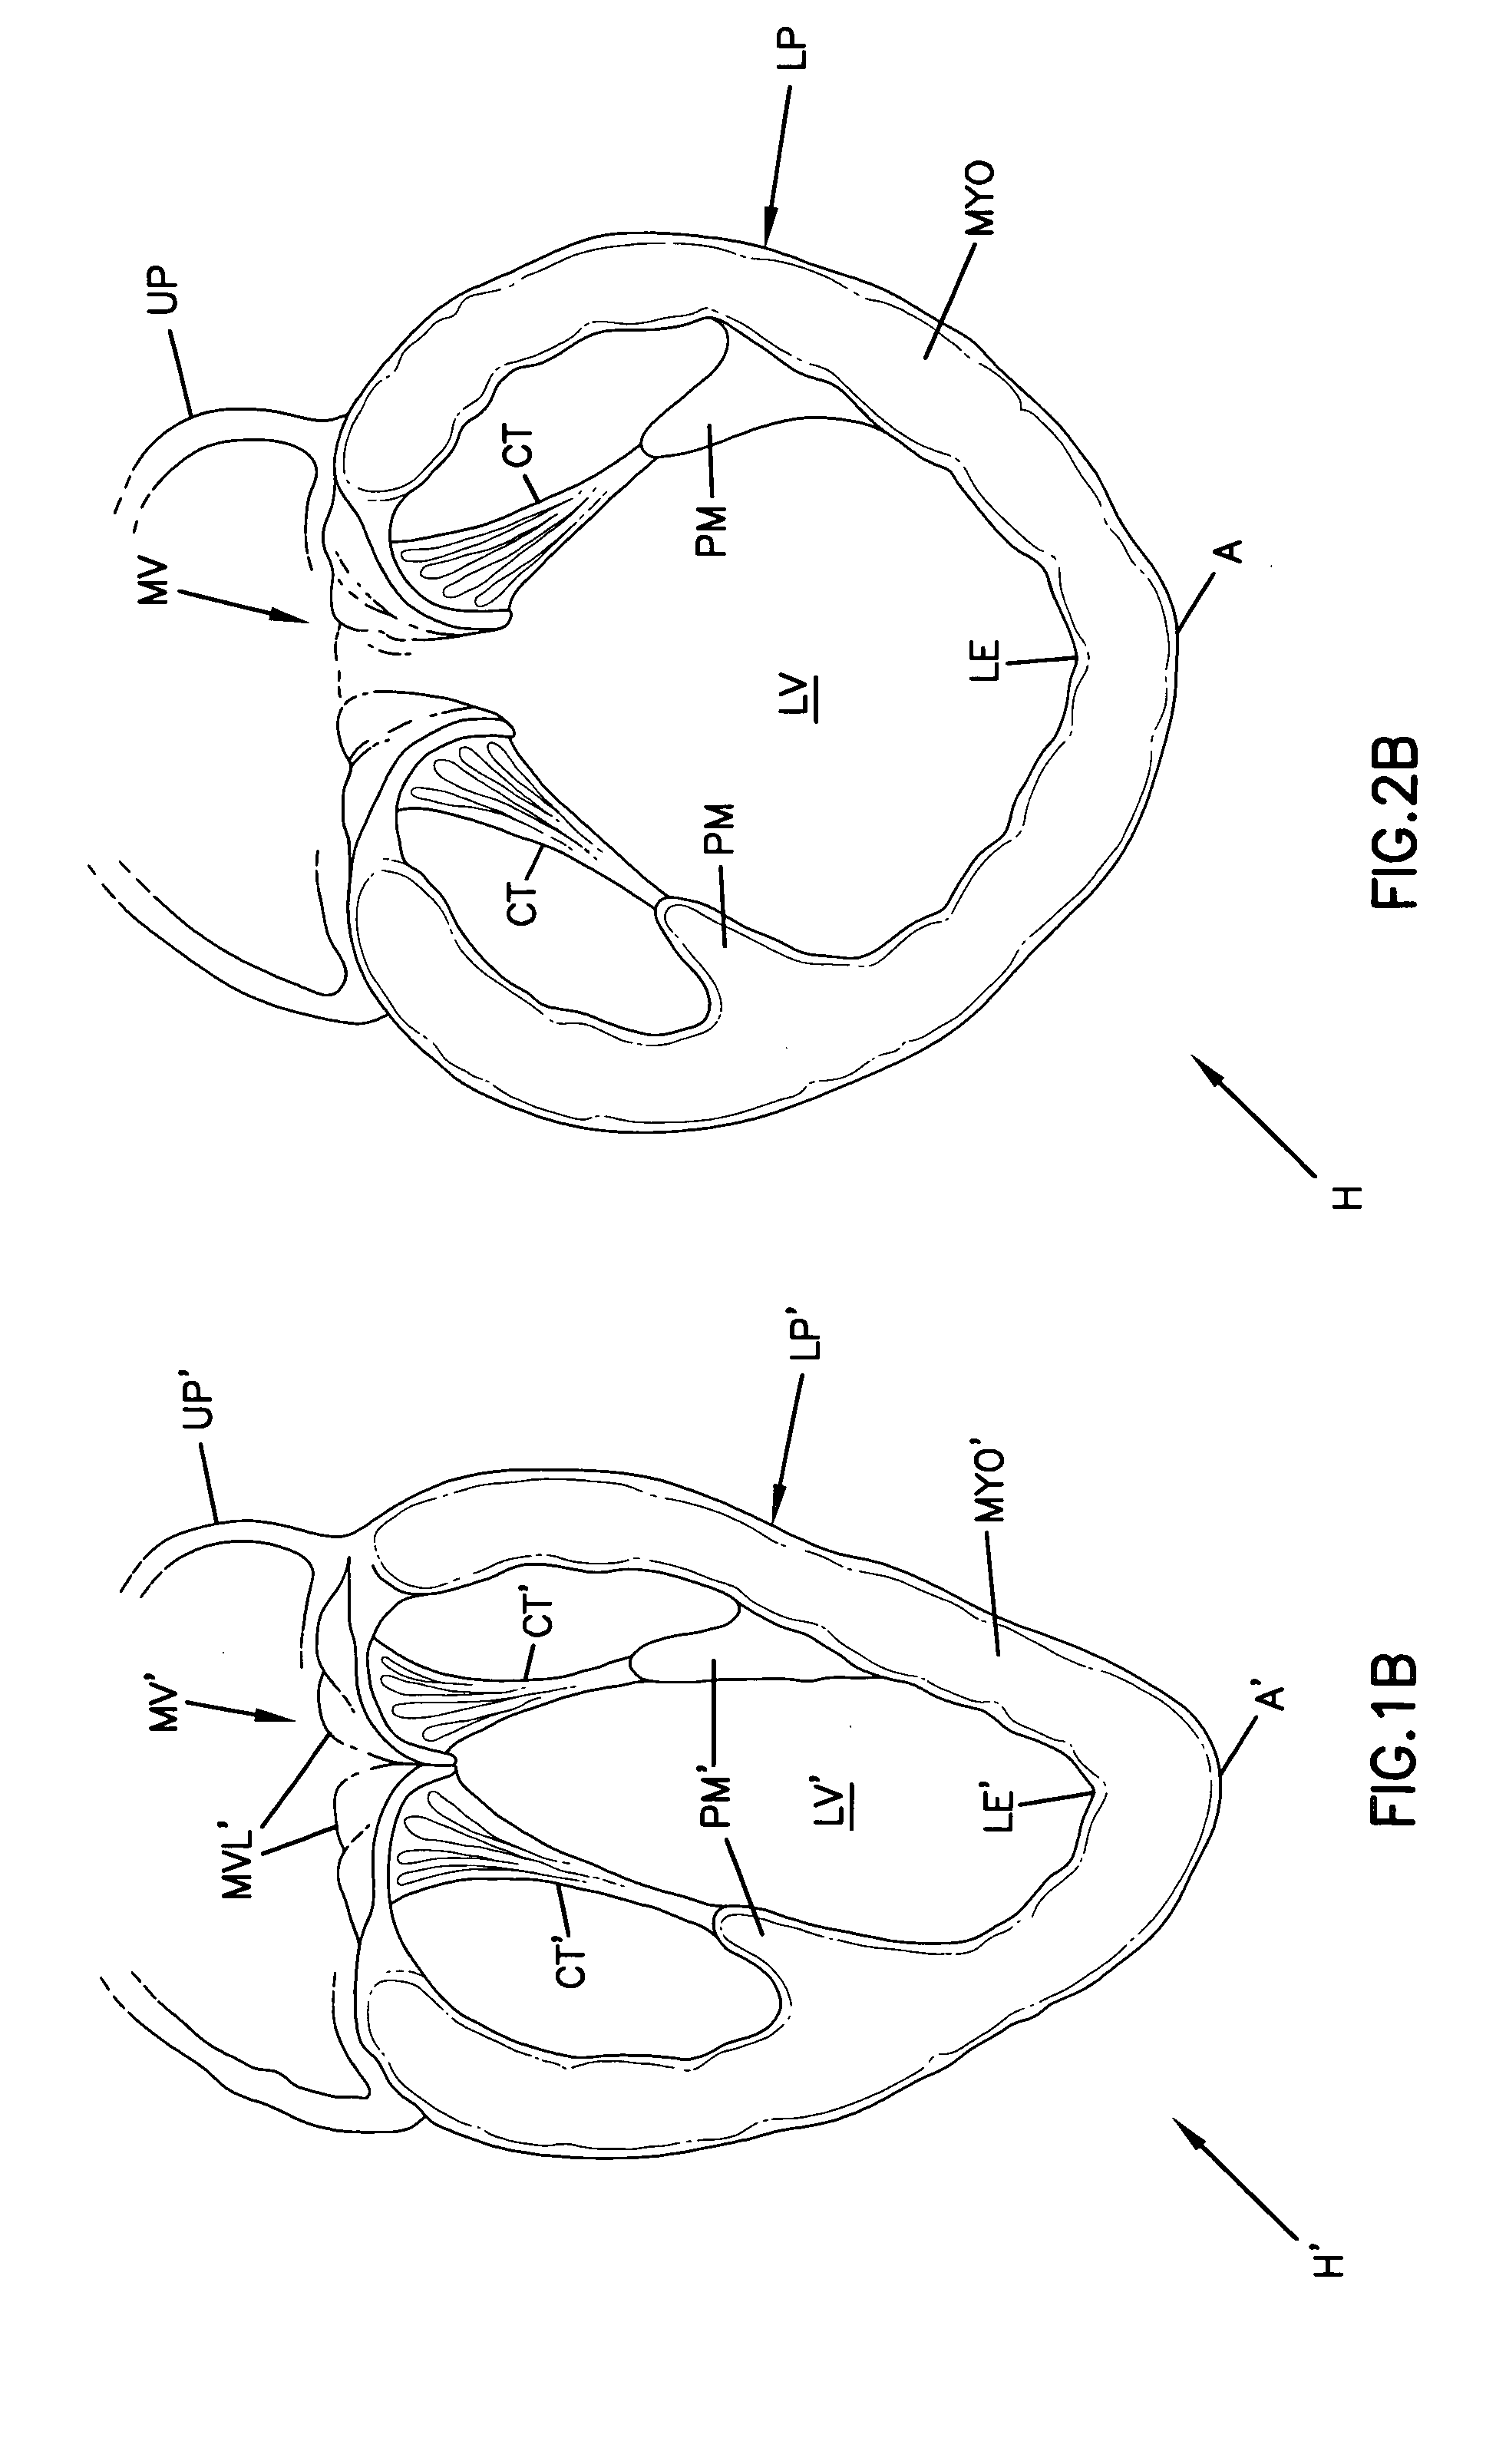 Cardiac support device